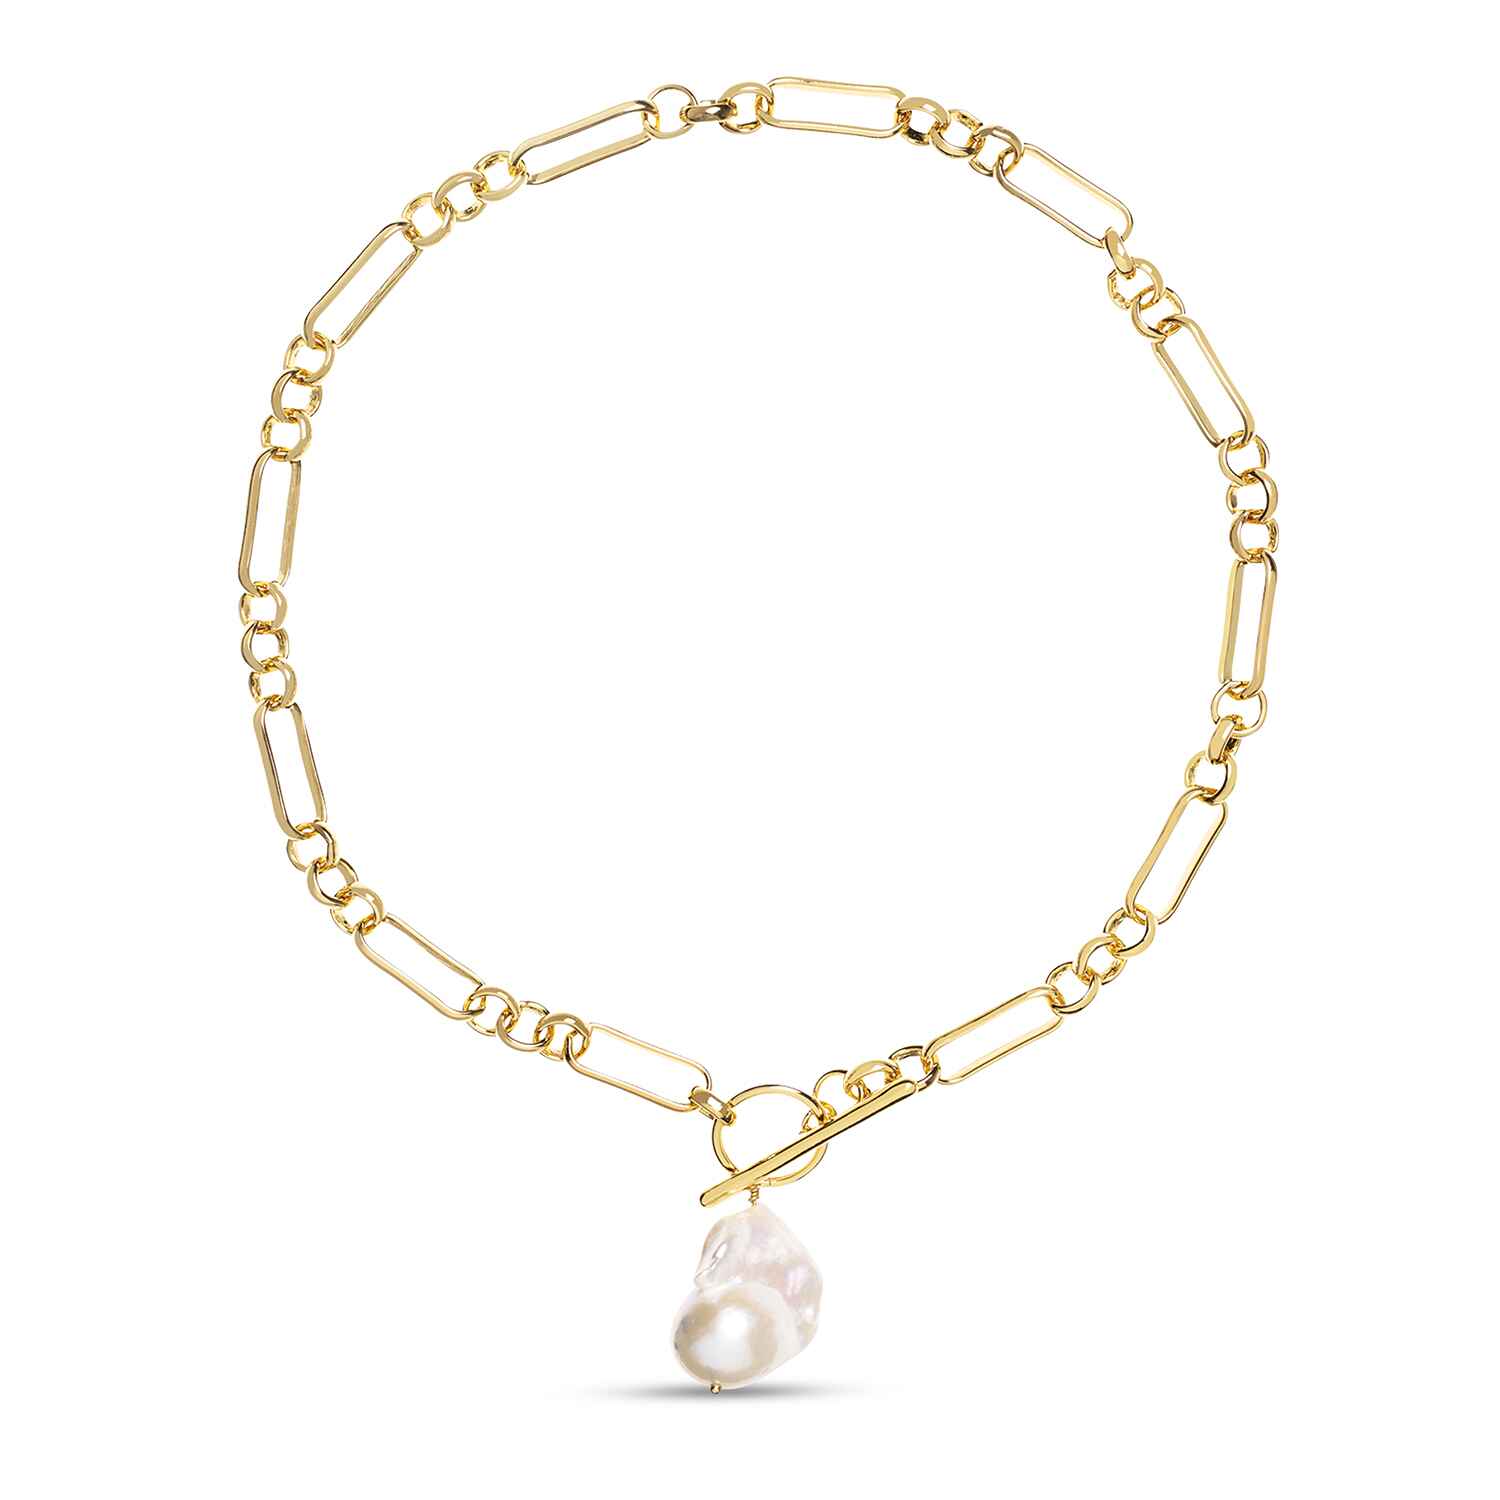 Alba Chunky mixed link Gold Necklace with large Keshi Pearl